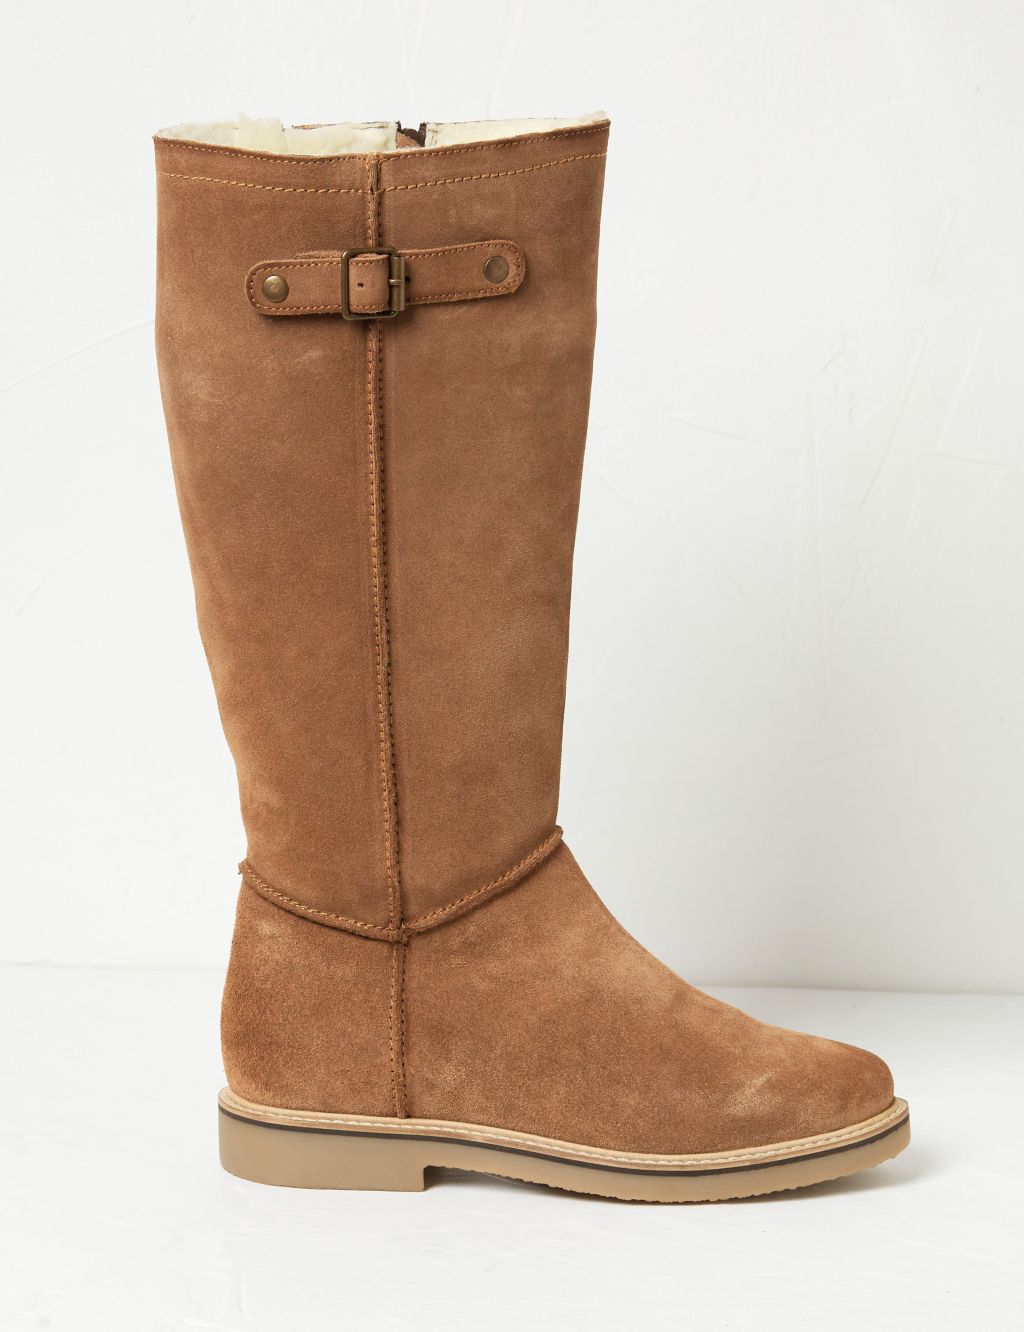 Suede Buckle Knee High Boots image 1